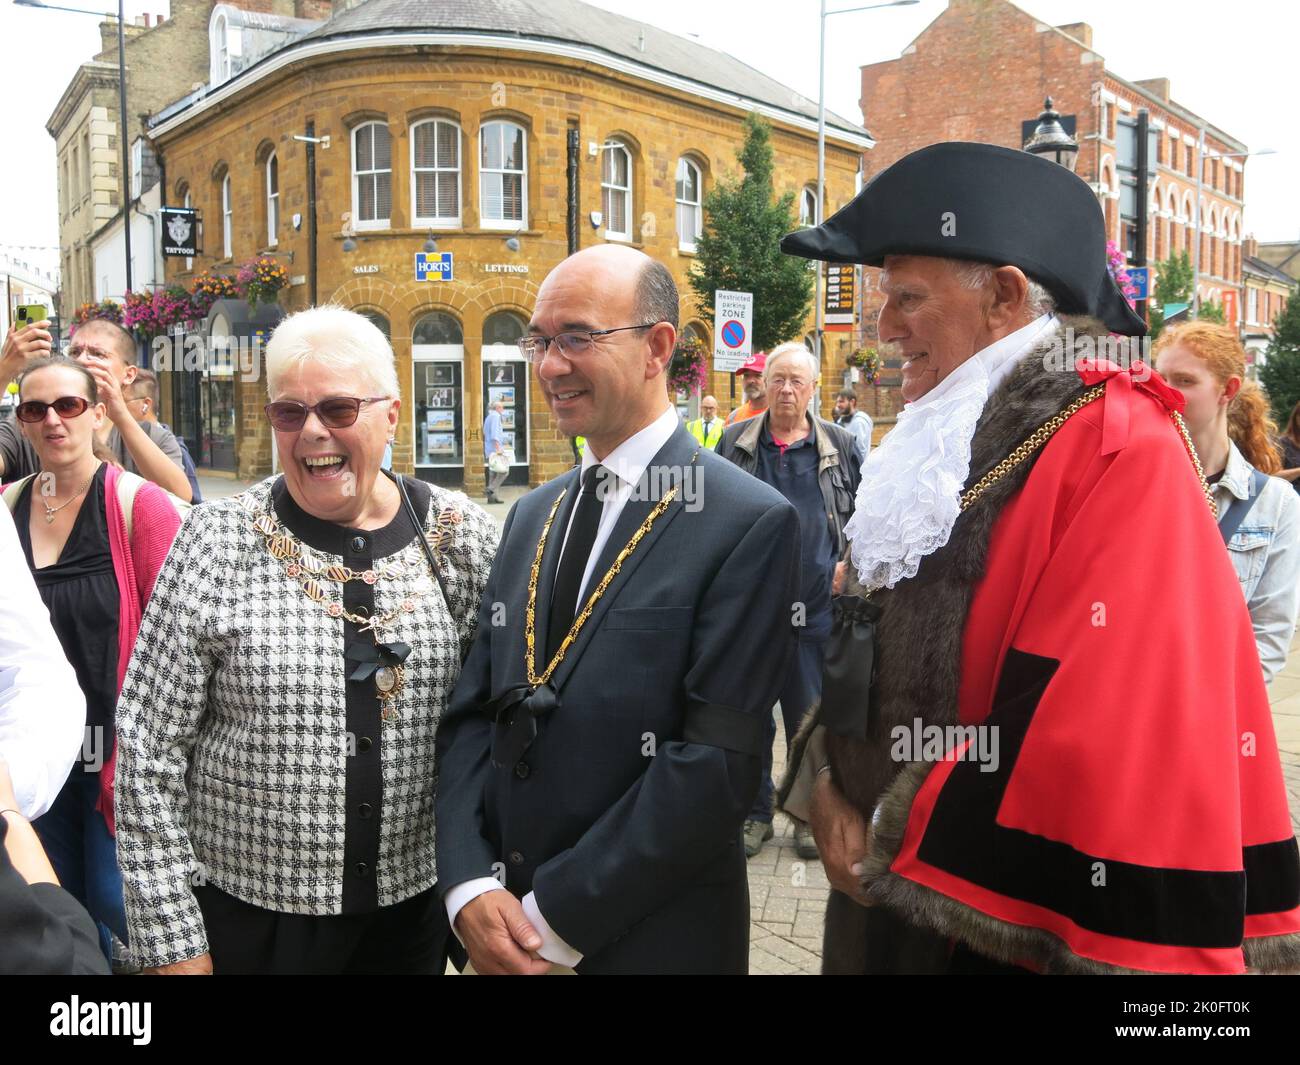 The Mayor of Northampton Cllr Dennis Meredith, Cllr Andre Gonzalez De Savage and the Mayor's wife at the Royal Proclamation for King Charles III. Stock Photo